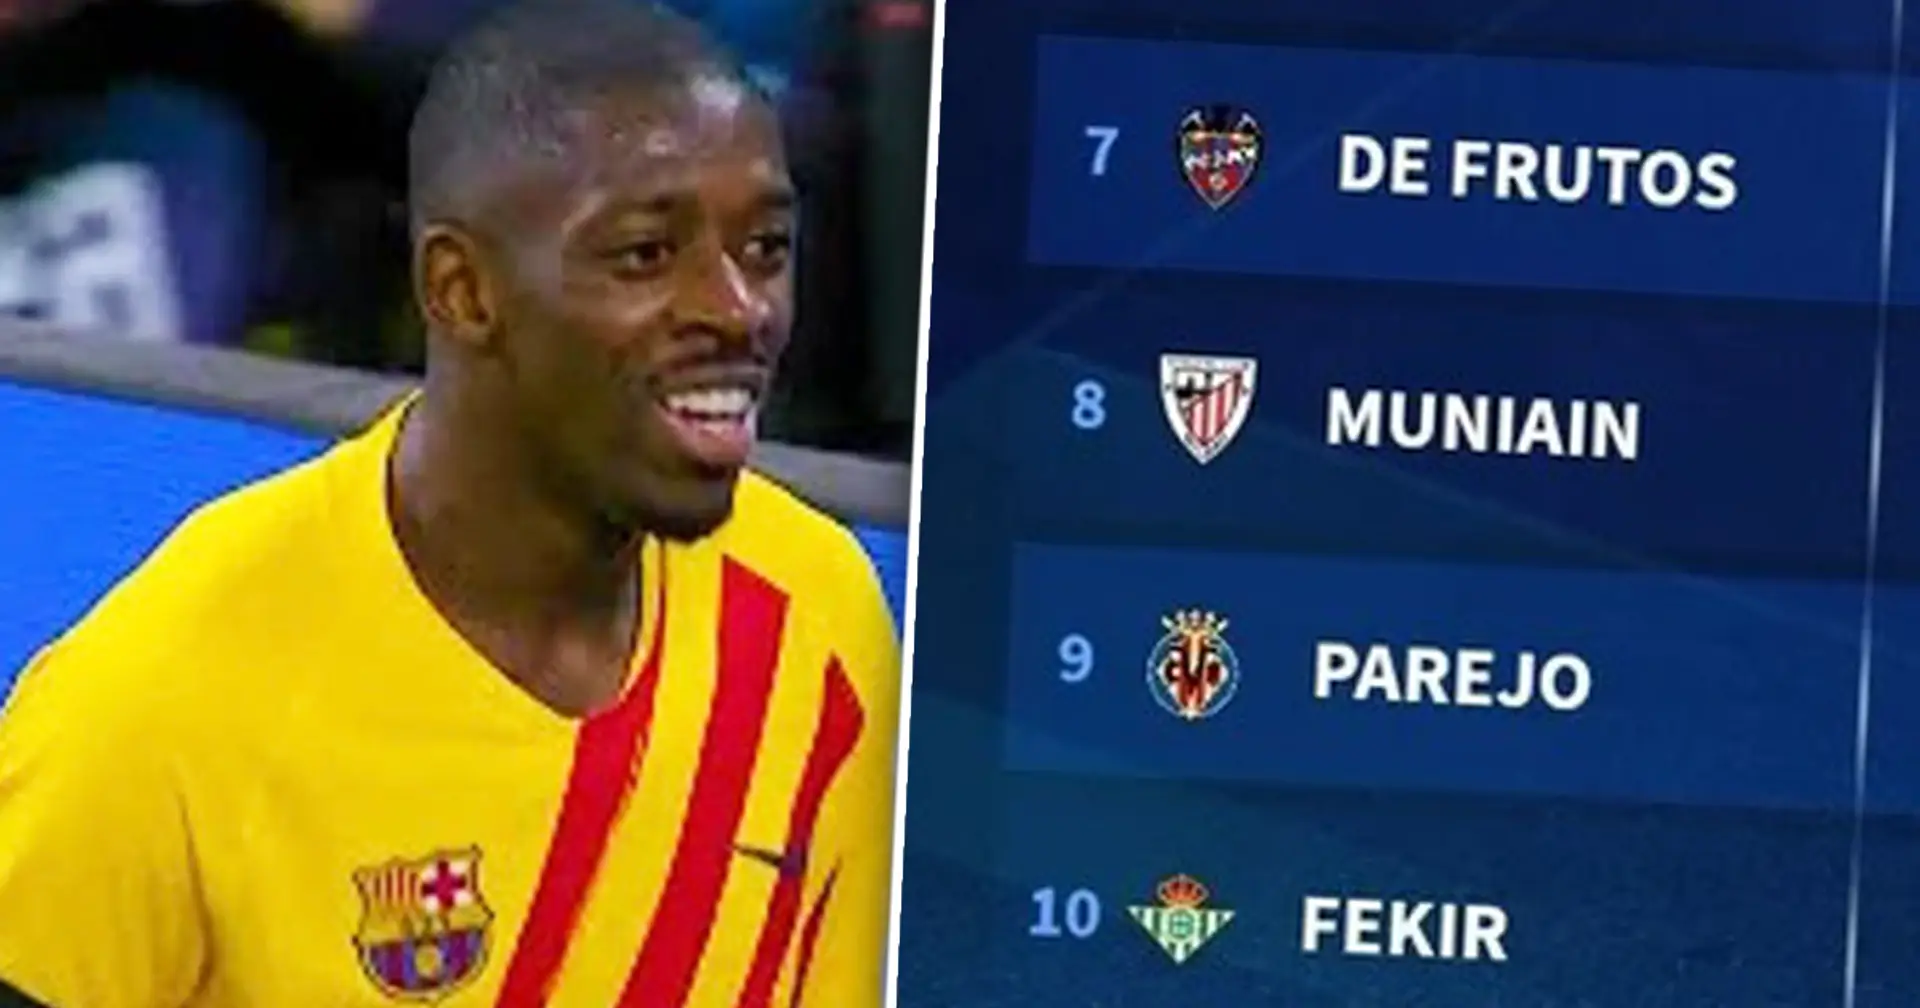 Dembele 2nd, one more Barca star in: Players with most La Liga assists in 2021/22